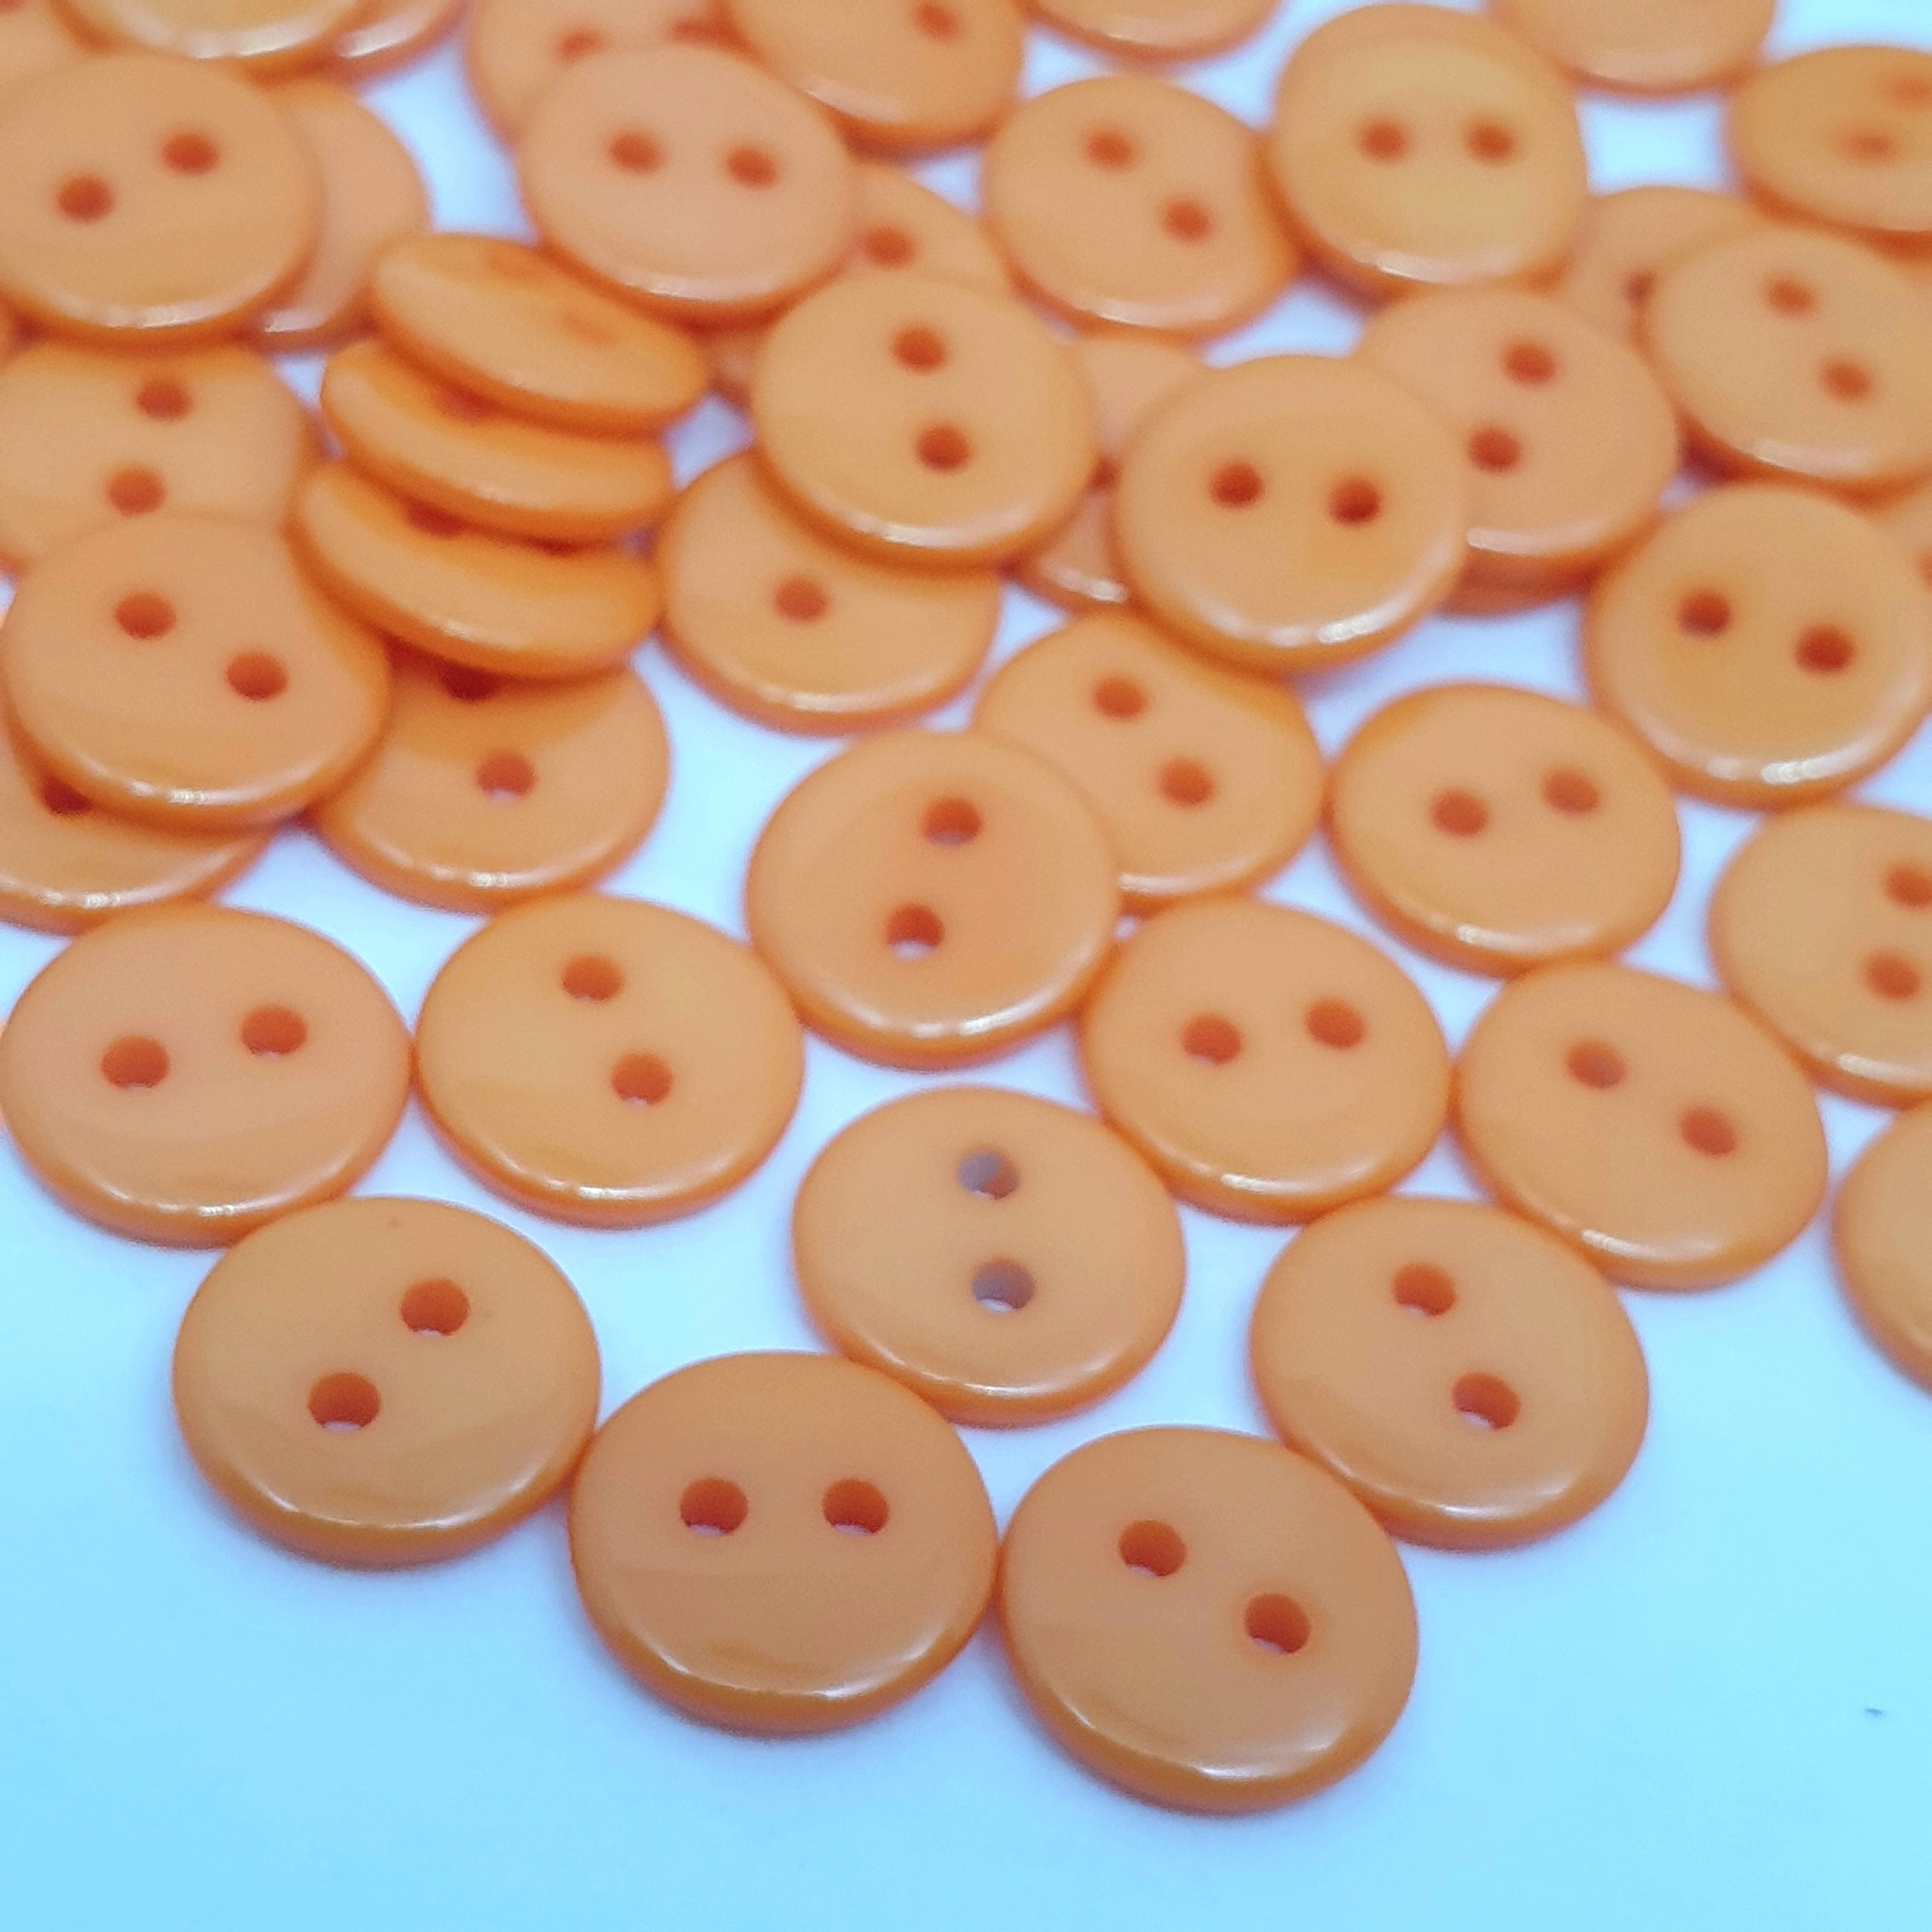 MajorCrafts 120pcs 9mm Orange Small 2 Holes Round Resin Sewing Buttons B11